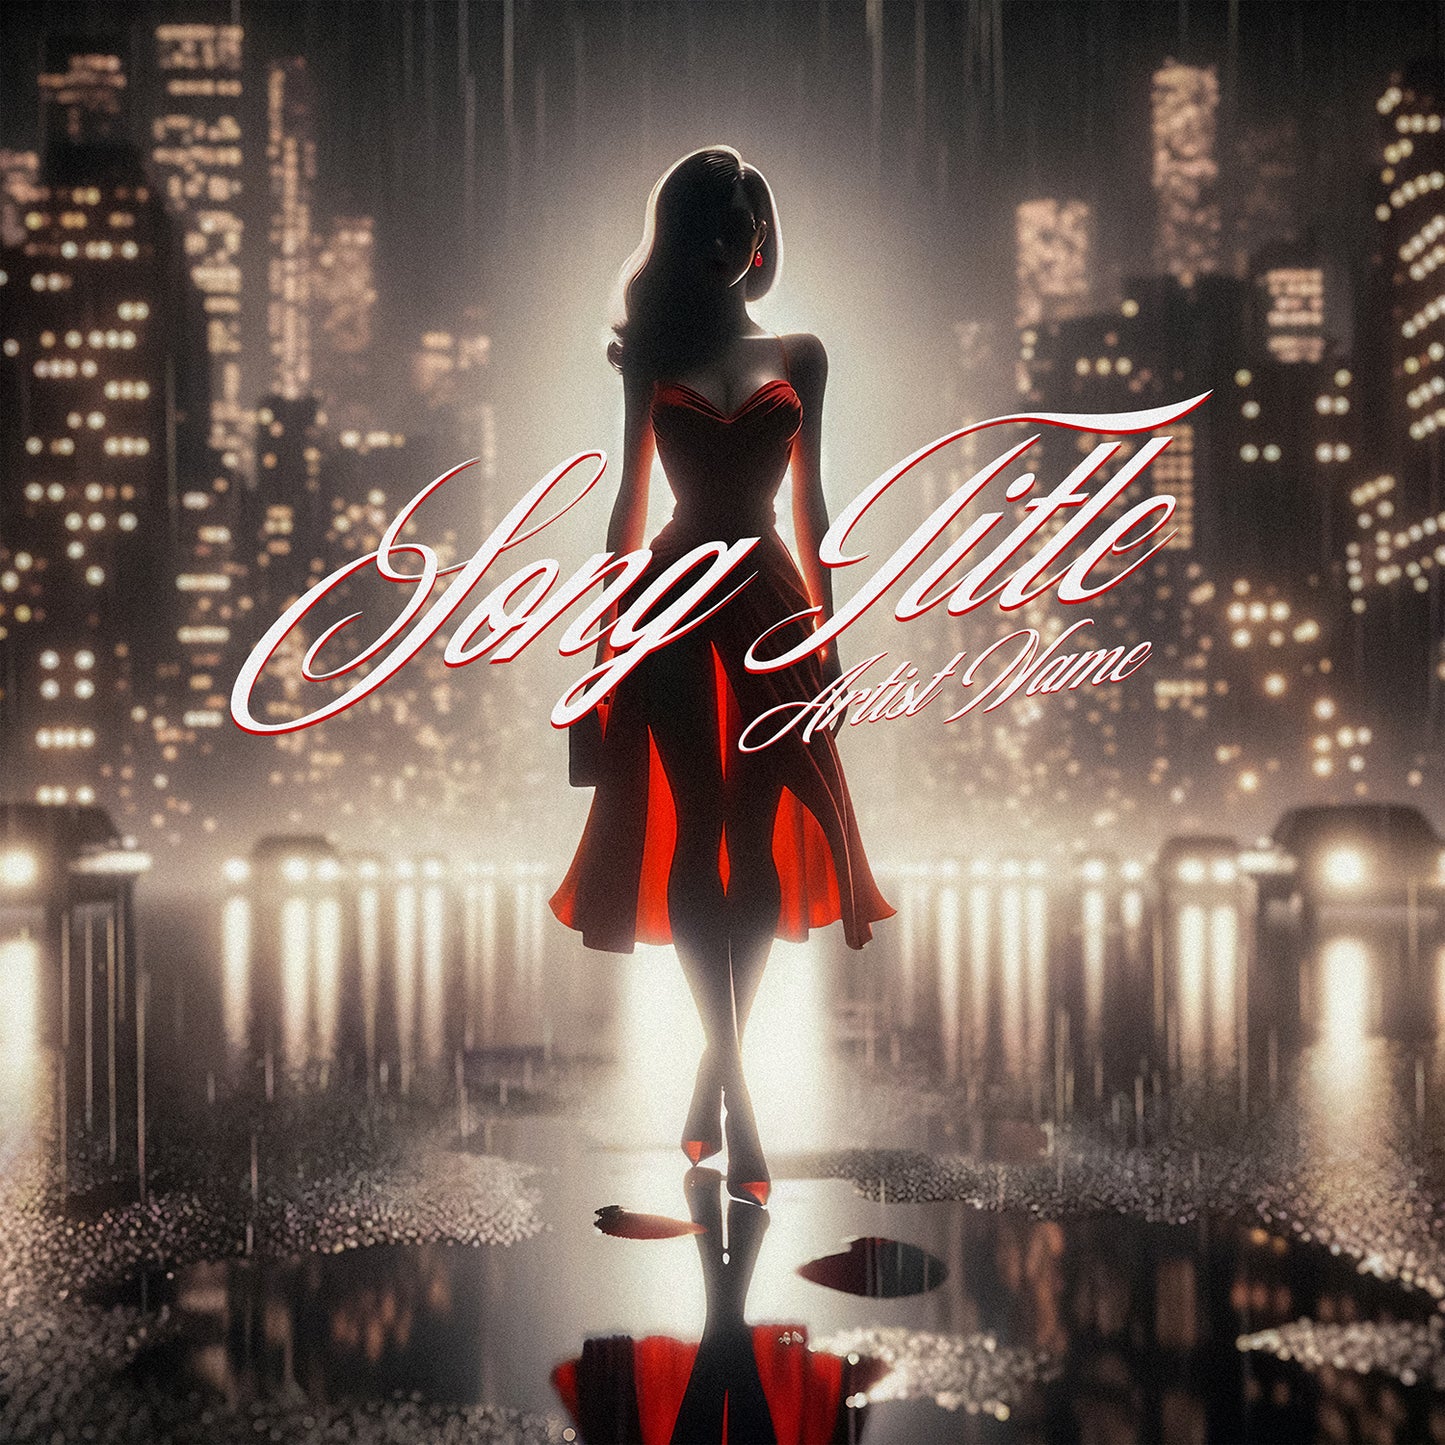 Silhouette of girl in red dress rainy city street cover art